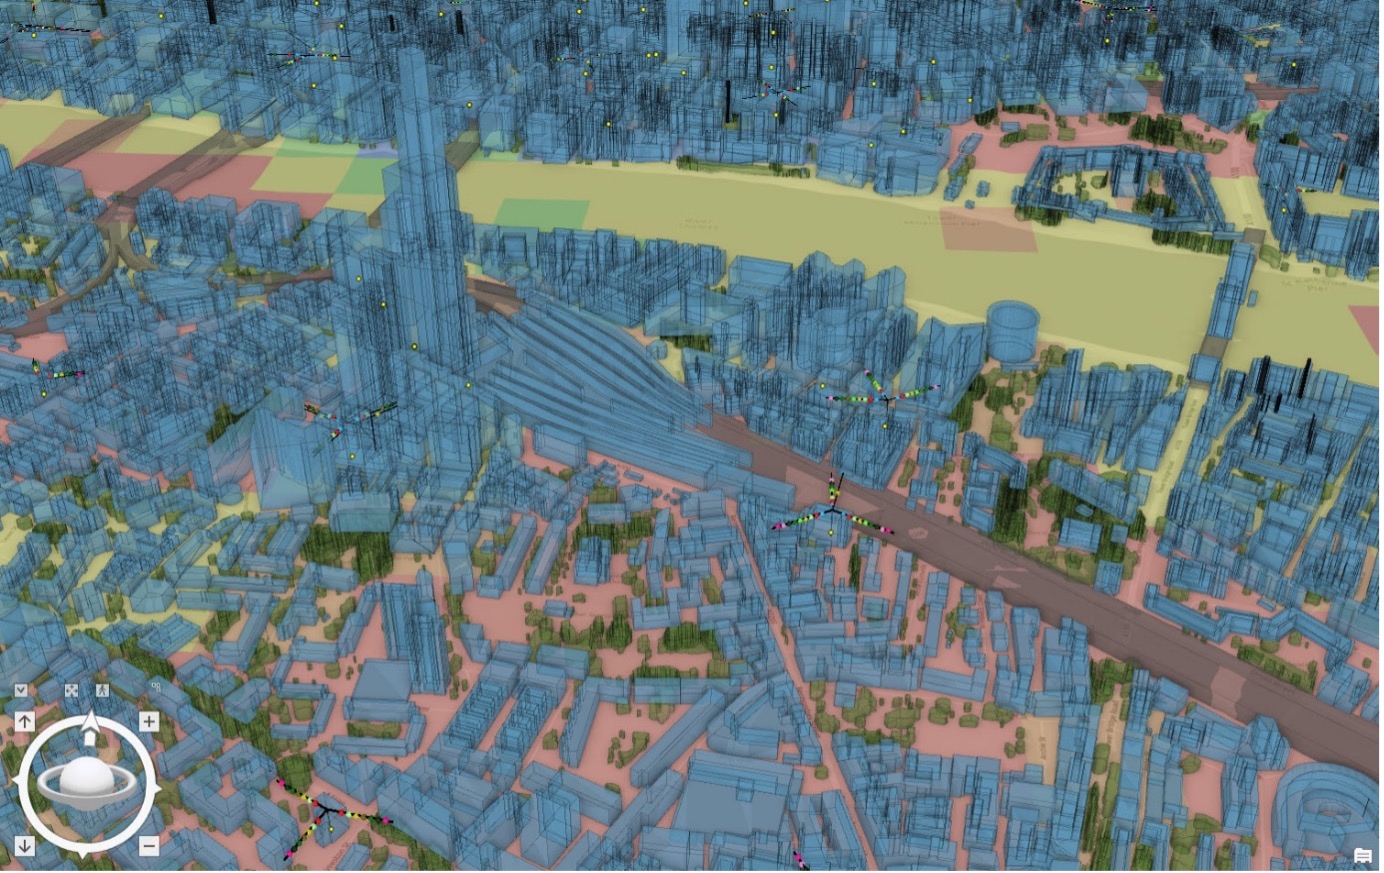 An image from Esri showing Vodafone's twin of the London Bridge area